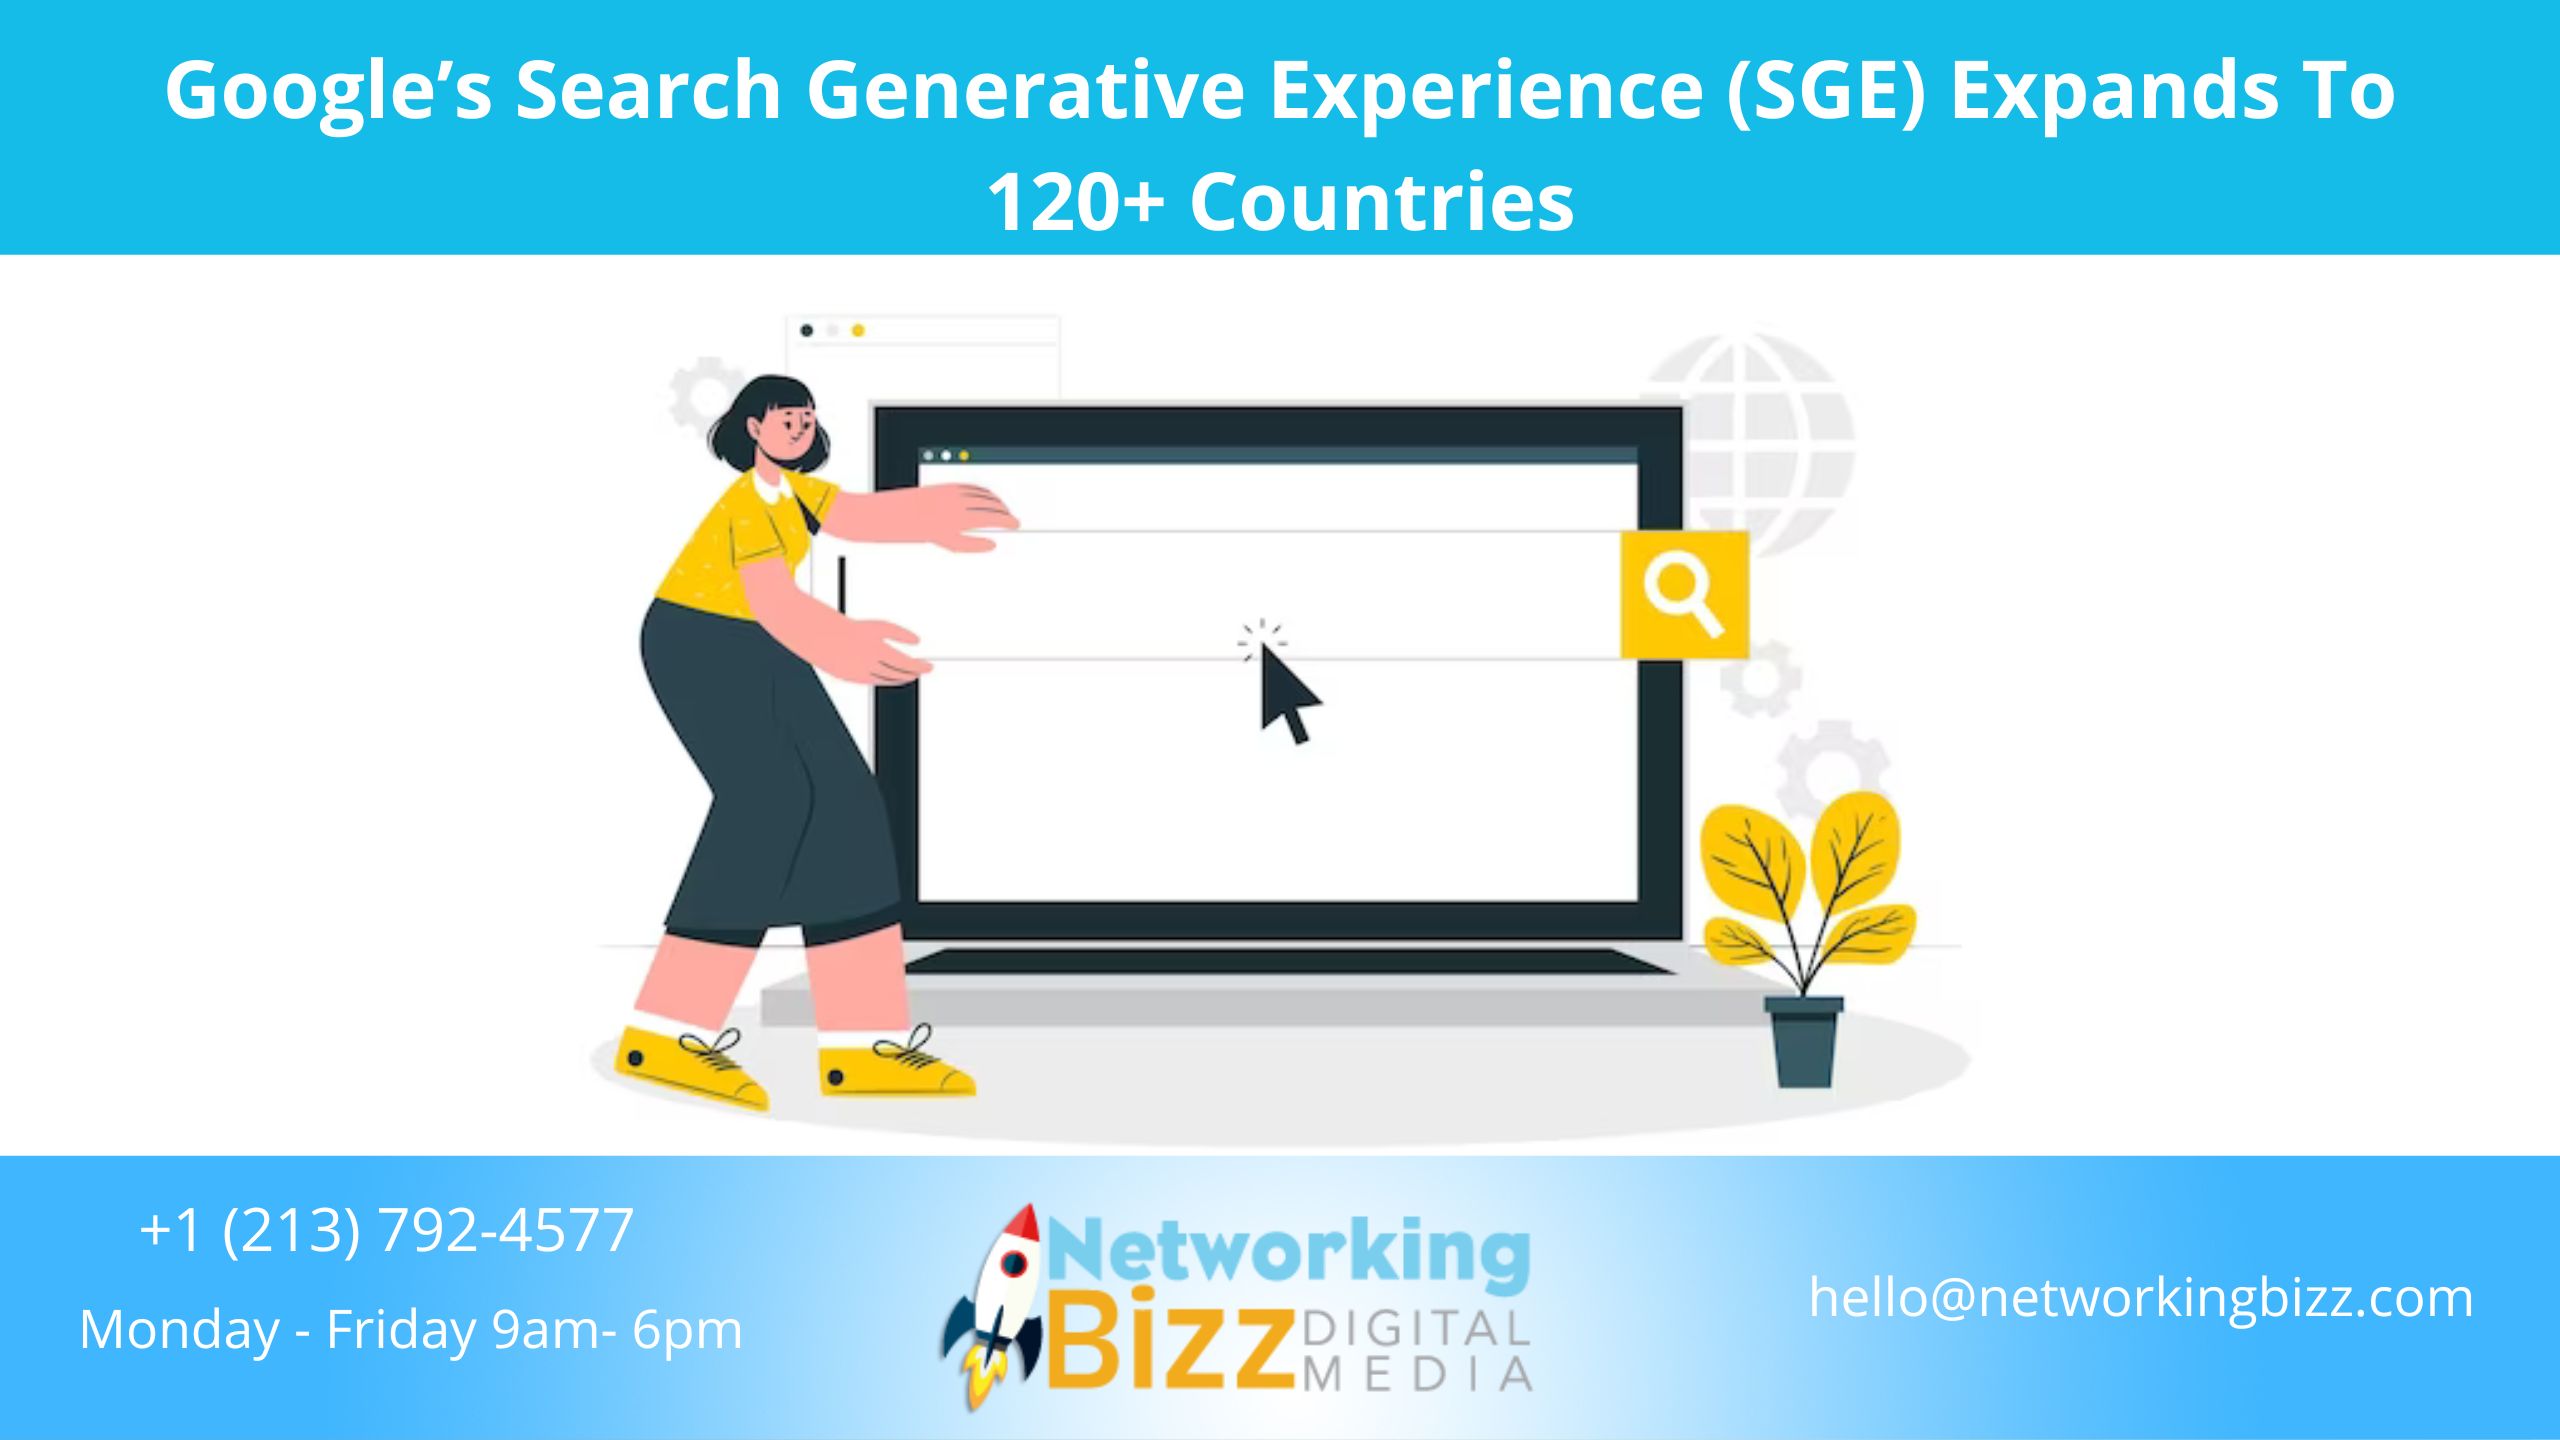 Google’s Search Generative Experience (SGE) Expands To 120+ Countries